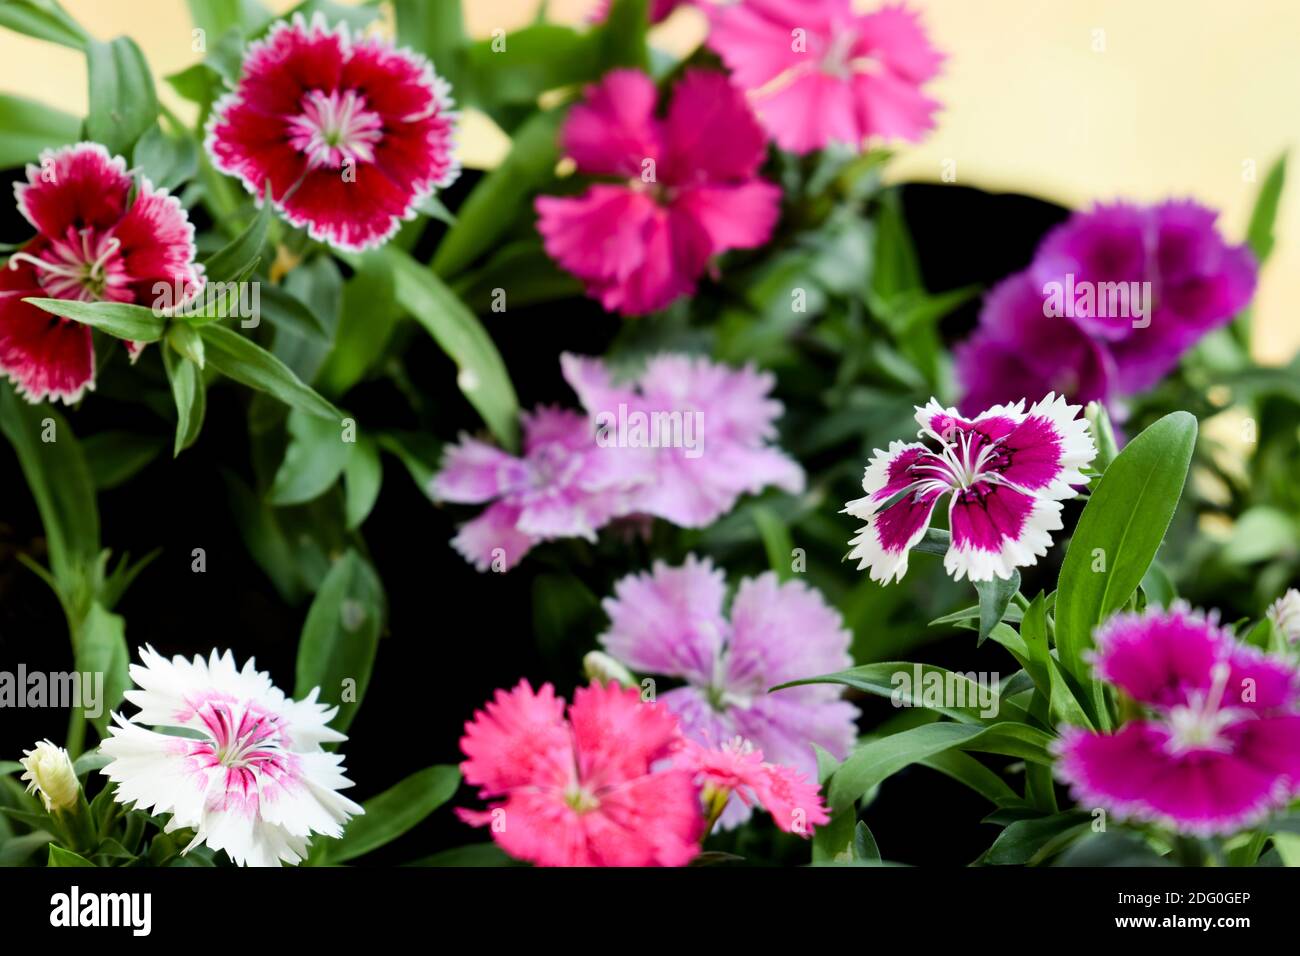 Various types of Dianthus flowers blooming in garden, backyard house balcony, bought in grow bags from nursery. Multicolor shaded bi-color and single Stock Photo